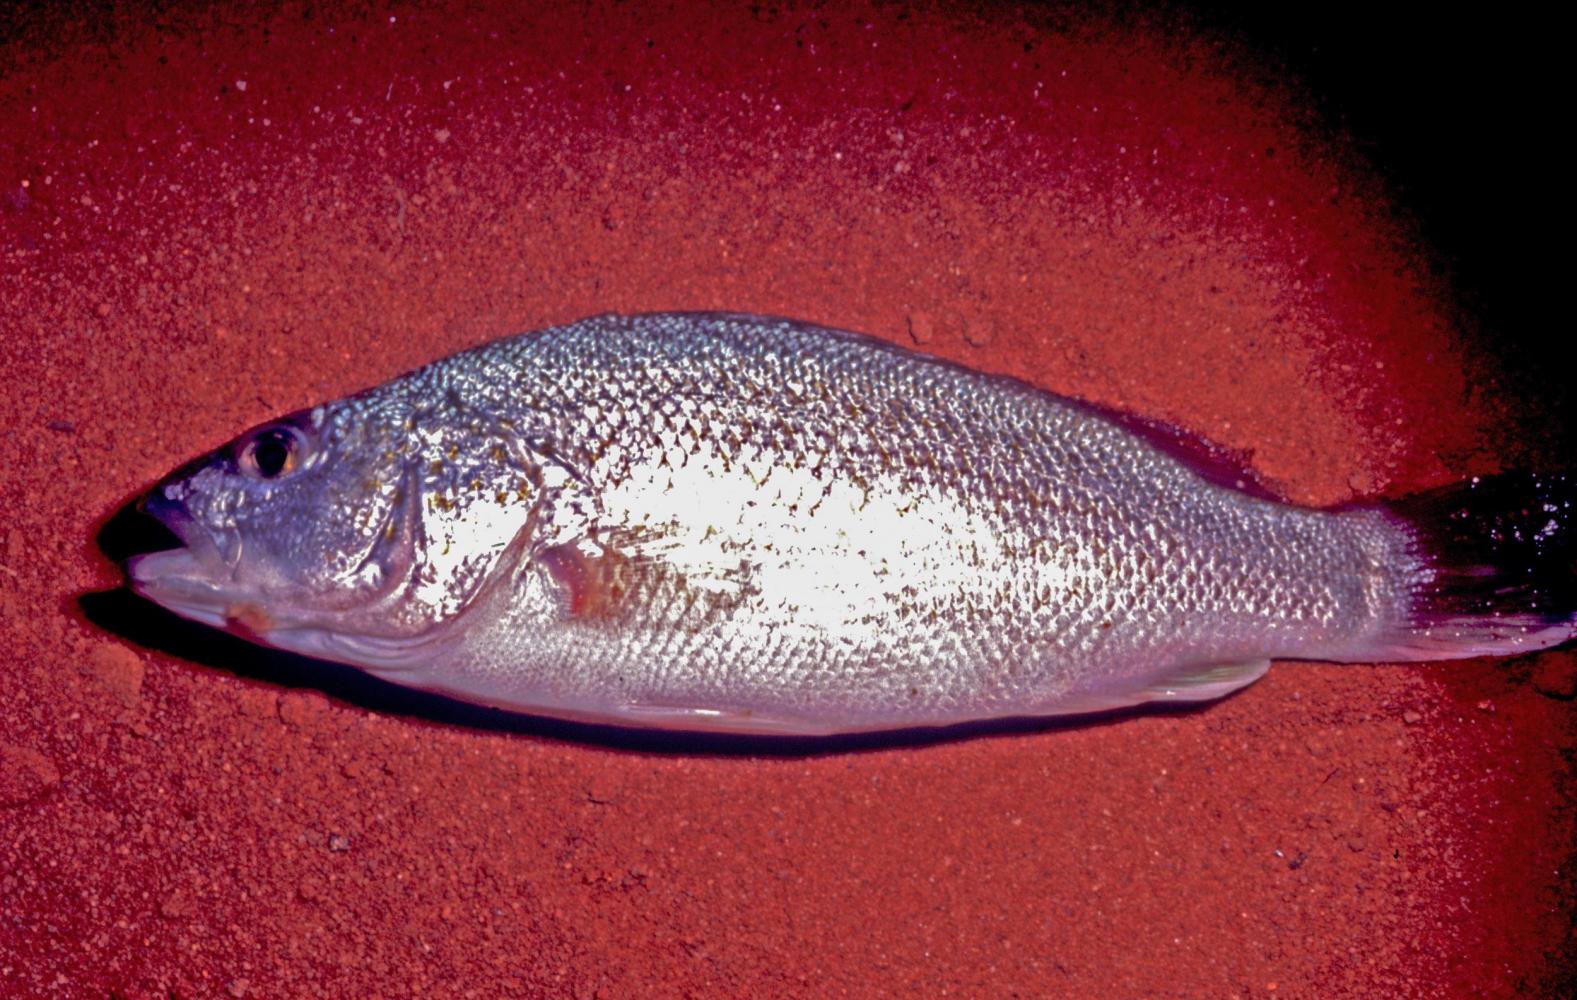 Bony Bream, once isolated in waterholes, can move great distances in floodwaters.